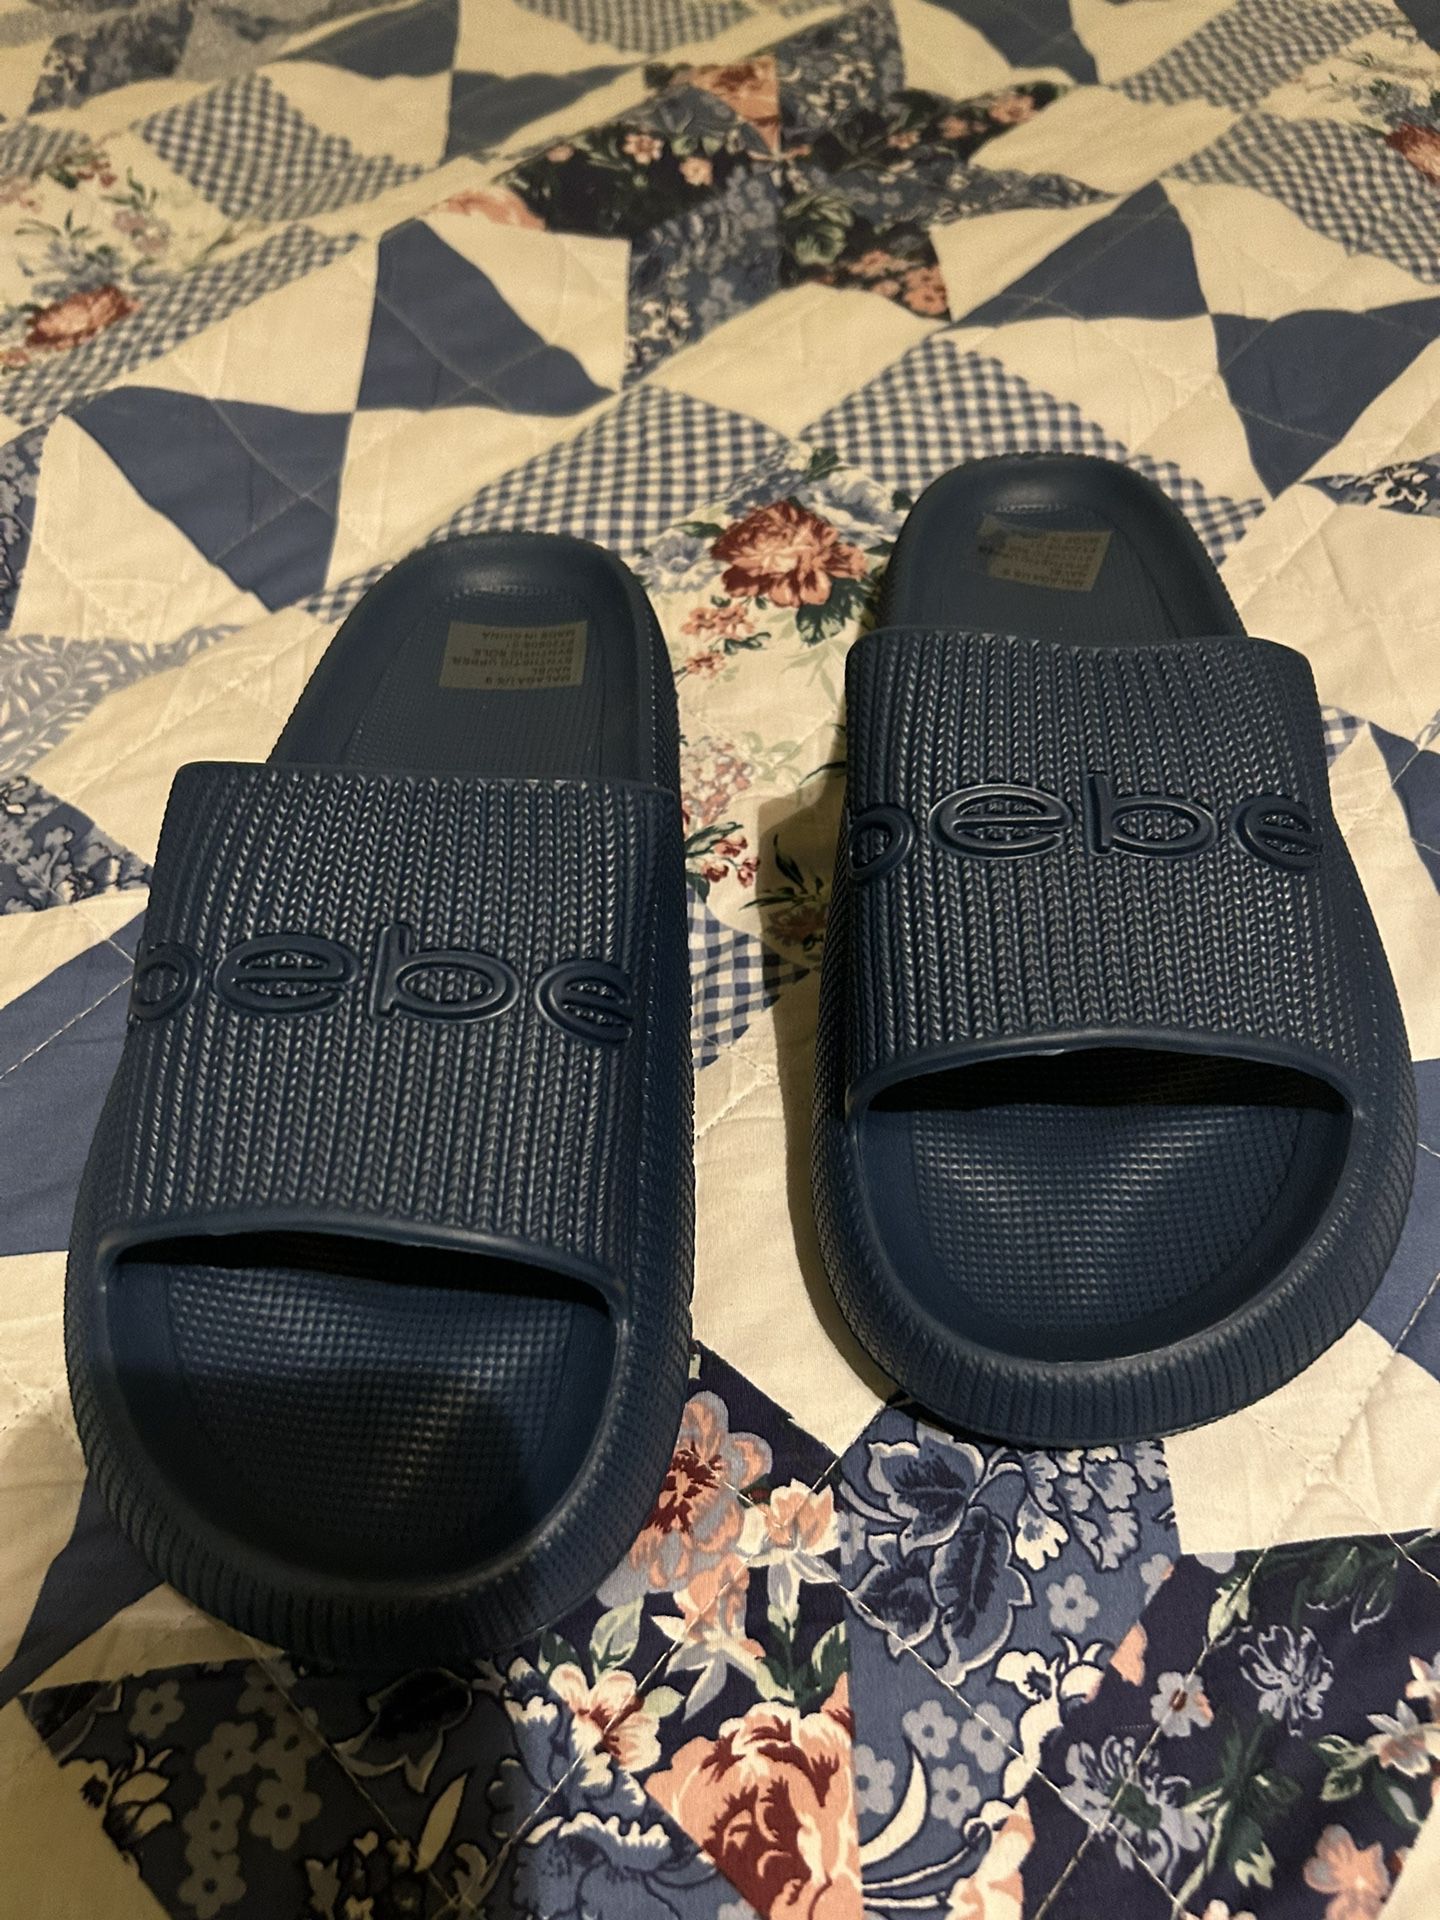 New BEBE Slides Navy Blue Size 9 for Sale in San Antonio, TX - OfferUp